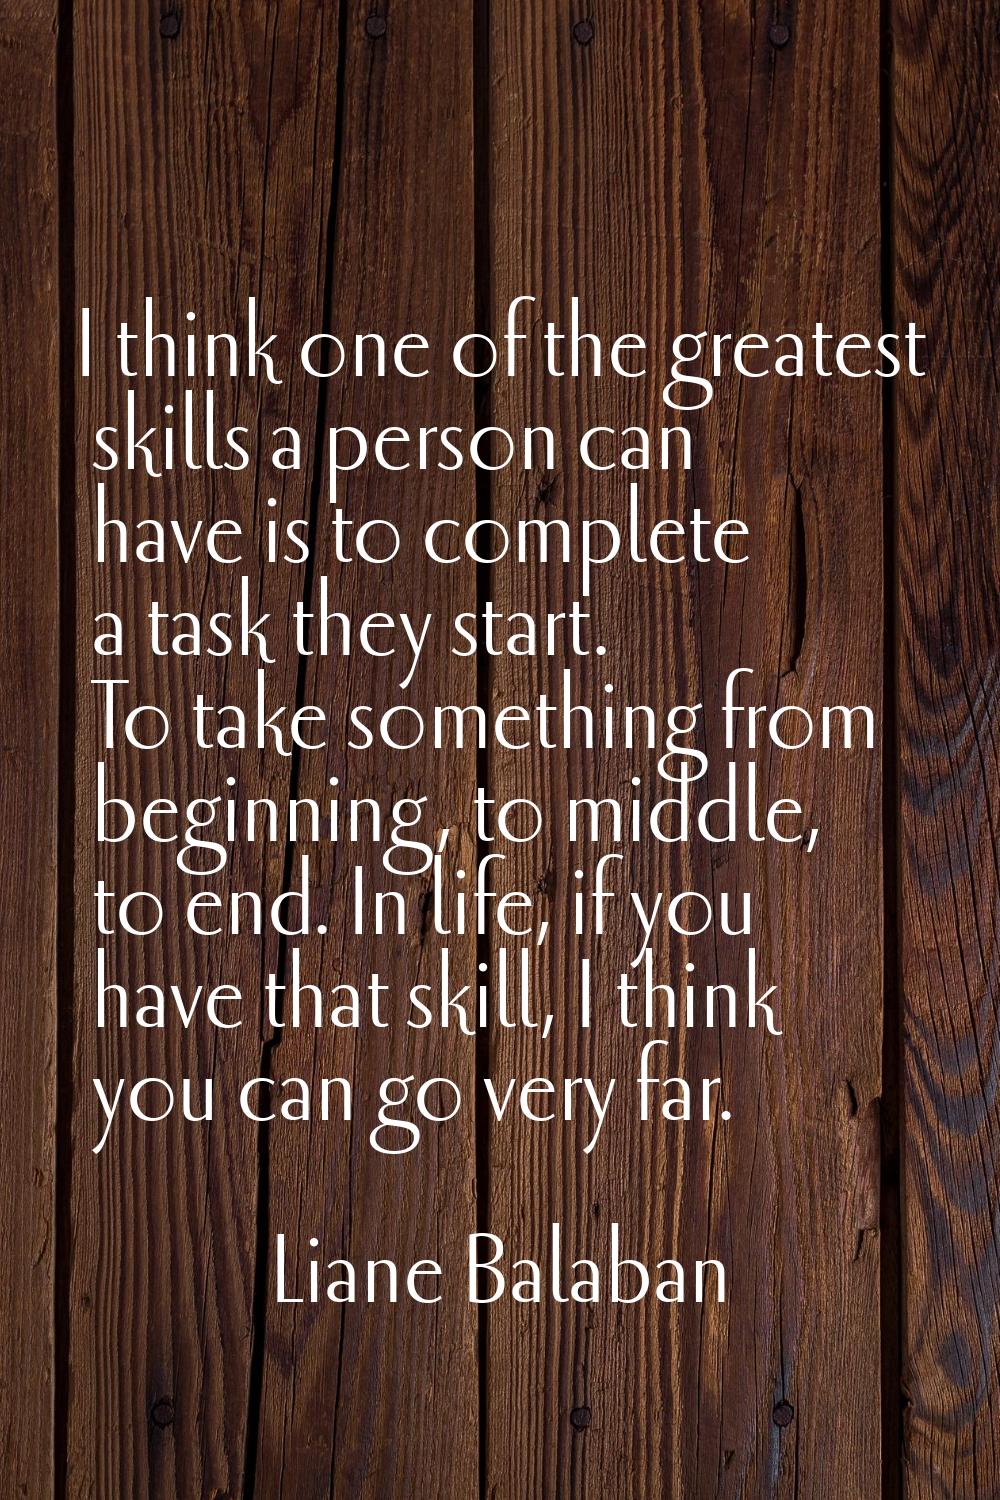 I think one of the greatest skills a person can have is to complete a task they start. To take some